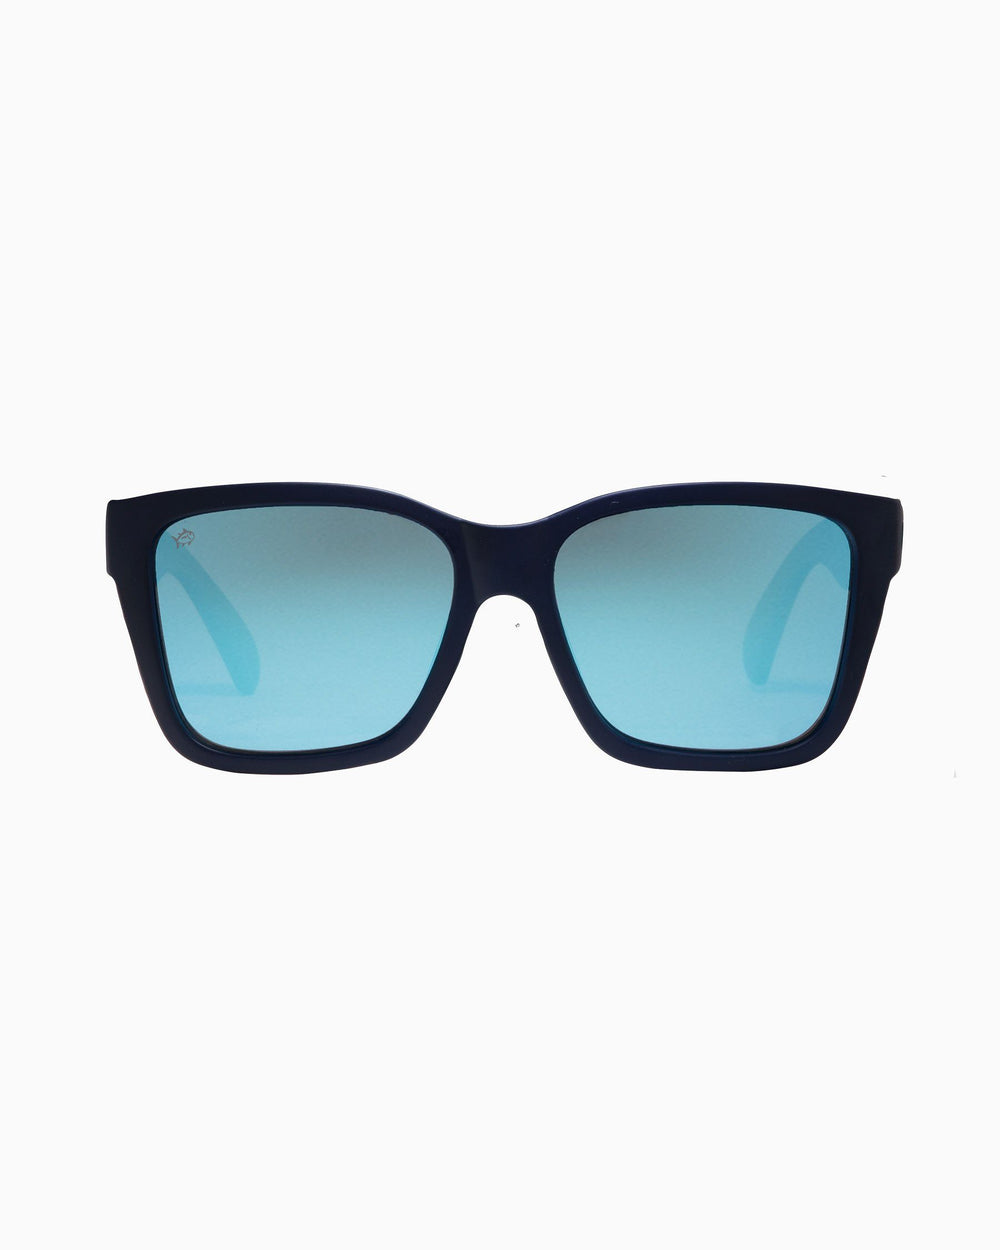 The front of the Rheos Edistos Sunglasses by Southern Tide - Boat Blue Marine